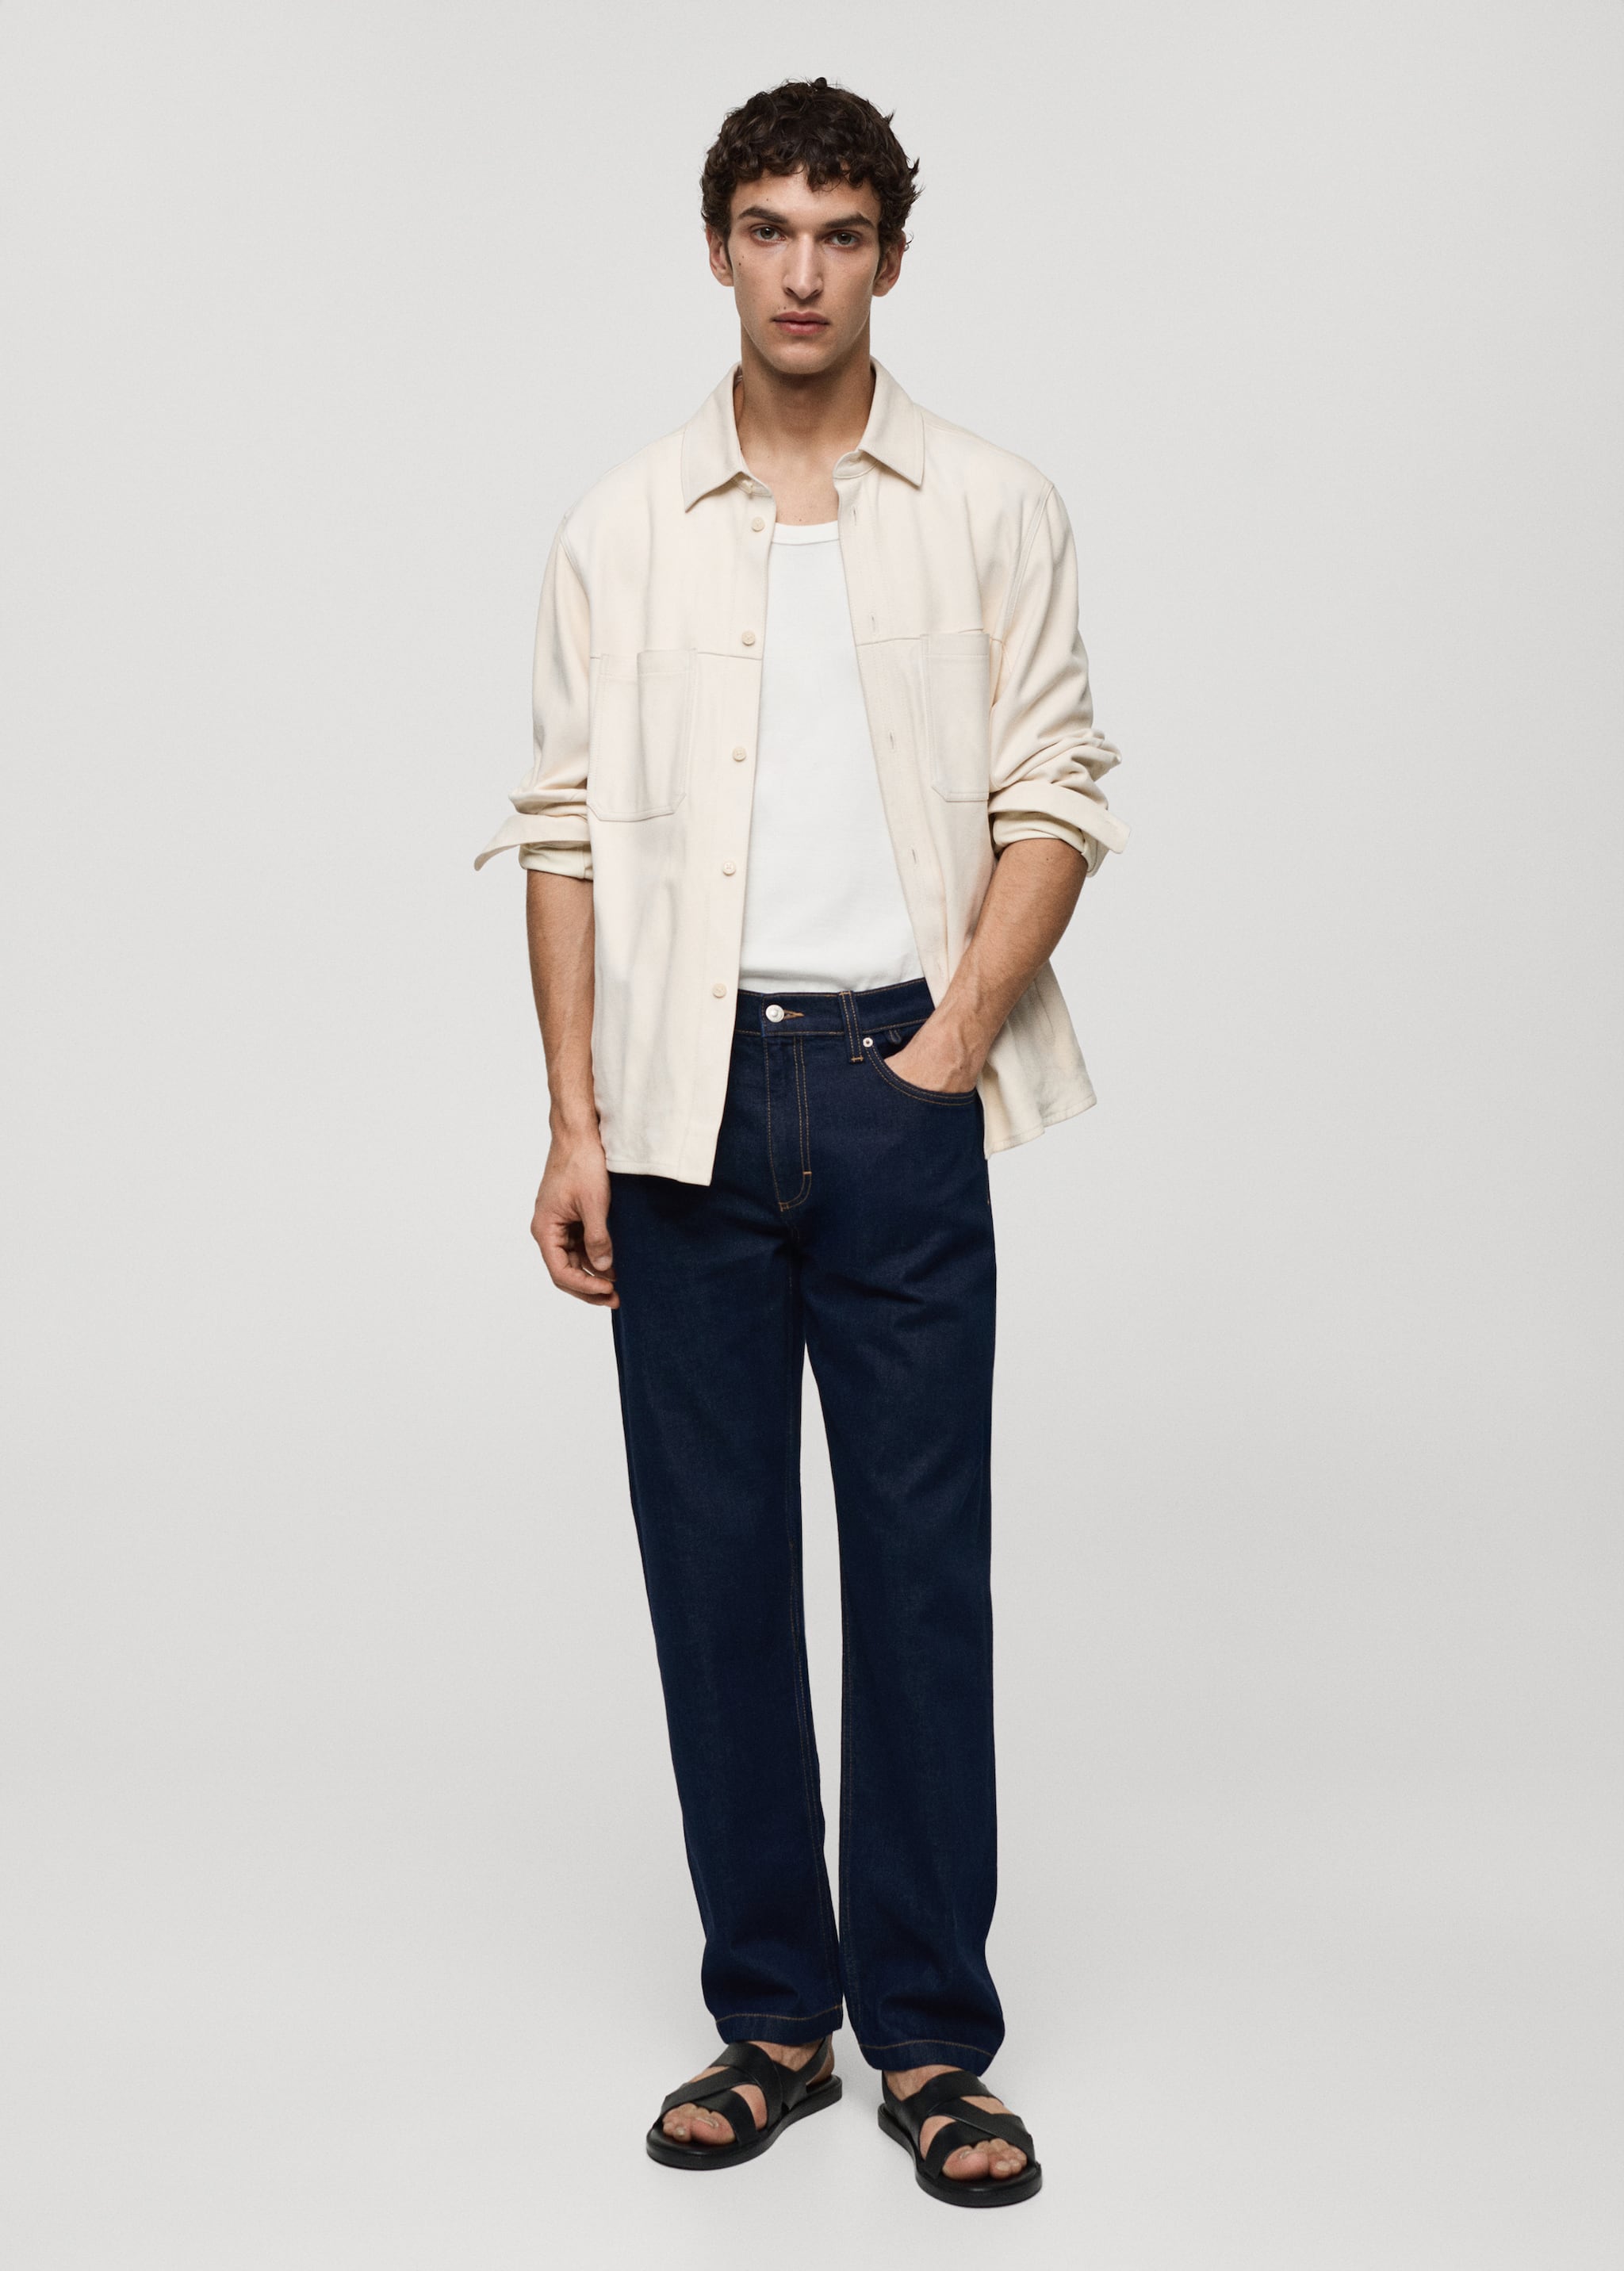 Relaxed-fit dark wash jeans - General plane